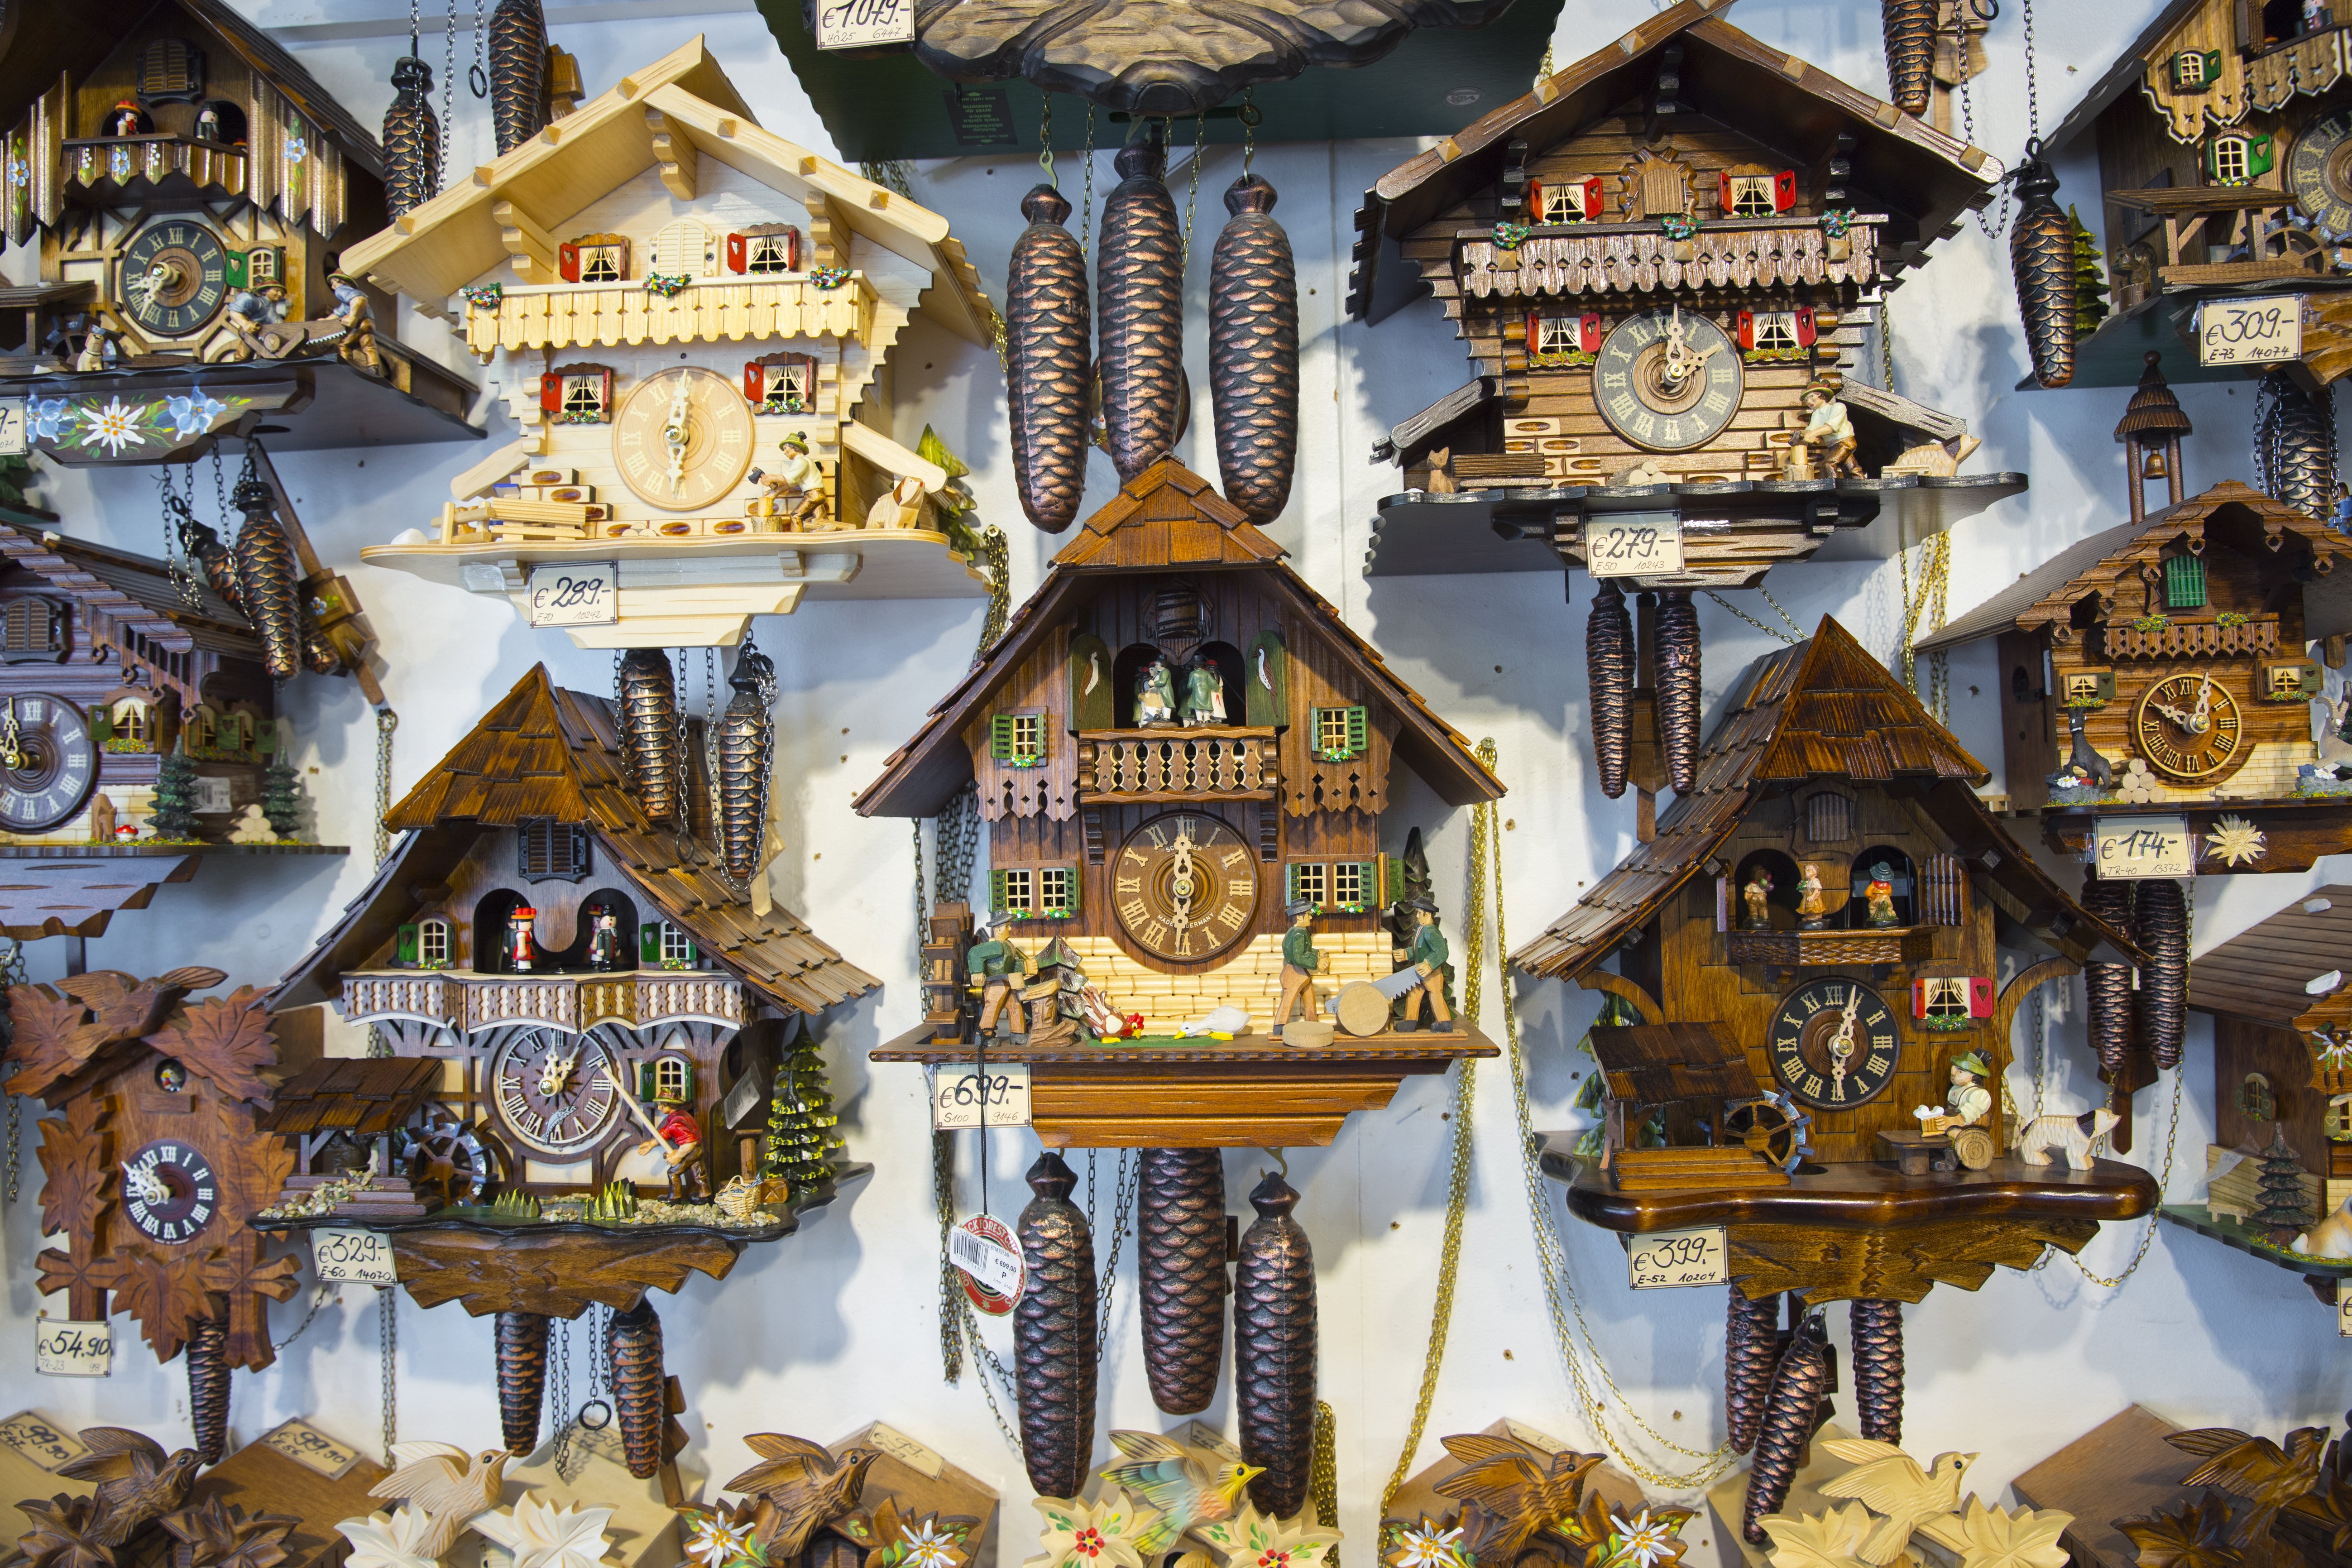 AUSTRIA - JULY 13:  Traditional cuckoo clocks on sale in Geschenkehaus shop in the town of Seefeld in the Tyrol, Austria (Photo by Tim Graham/Getty Images)